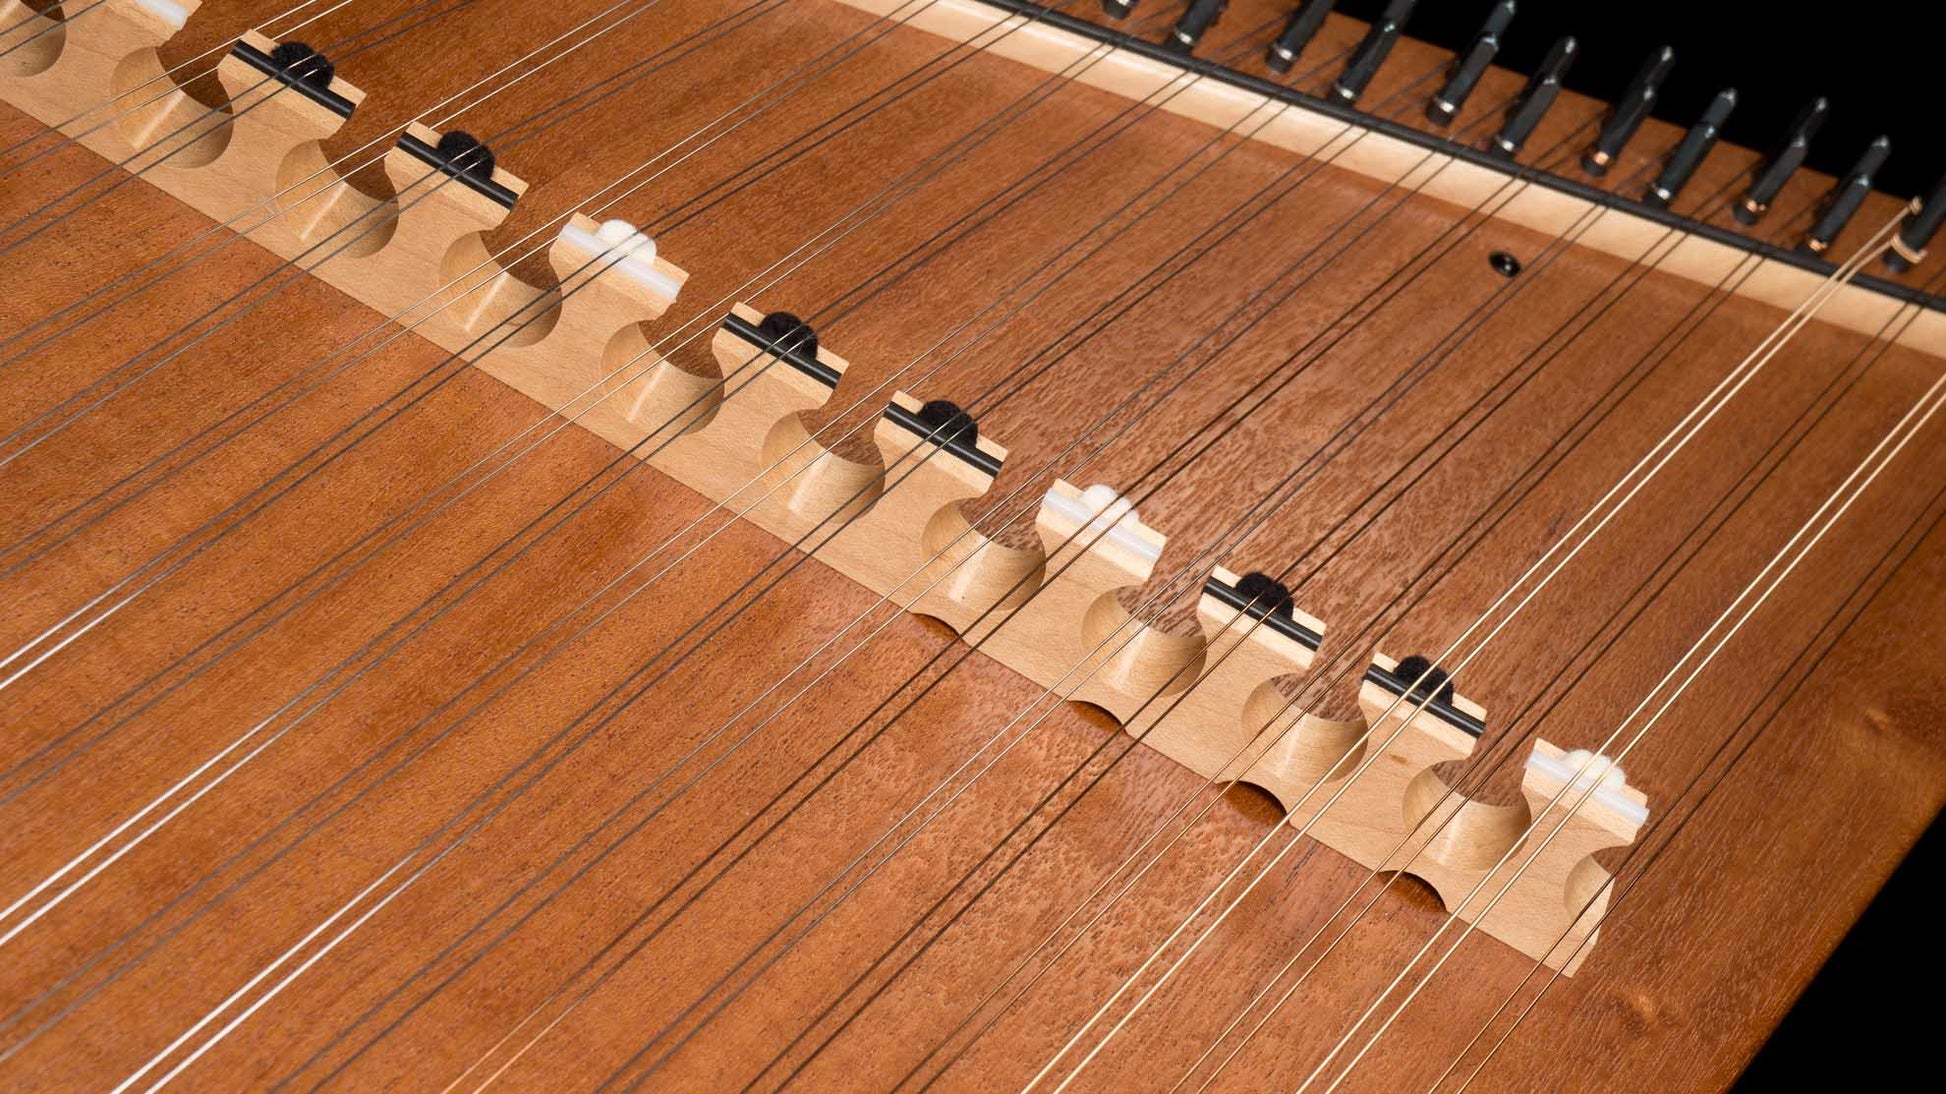 How Many Tuning Pins Does A Hammered Dulcimer